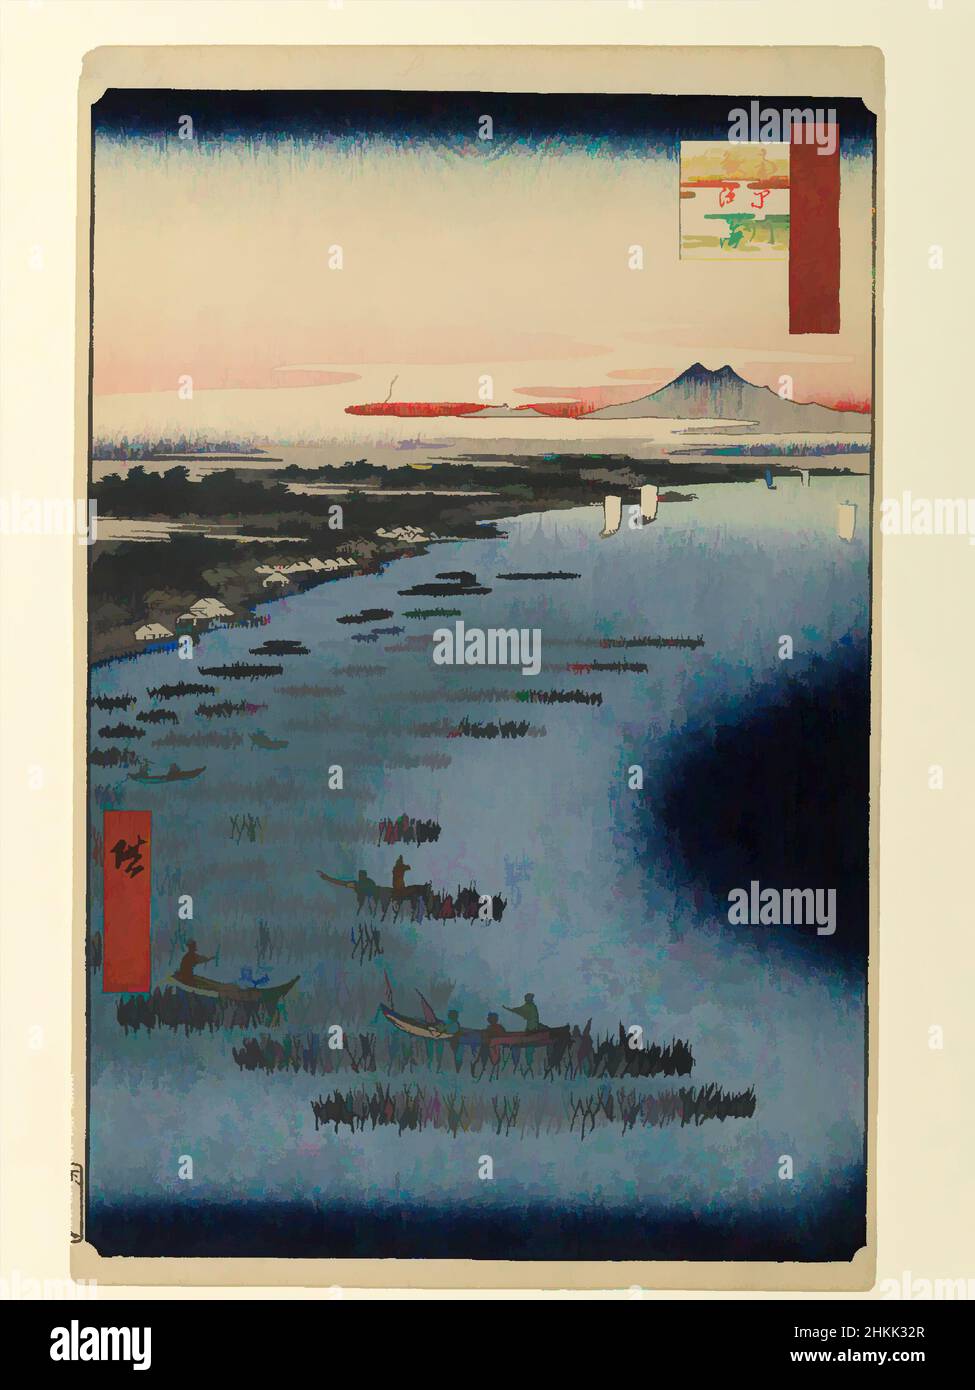 Art inspired by Minami-Shinagawa and Samezu Coast, No. 109 from One Hundred Famous Views of Edo, Utagawa Hiroshige, Ando, Japanese, 1797-1858, Woodblock print, Japan, 2nd month of 1857, Edo Period, Ansei Era, Sheet: 14 3/16 x 9 1/4 in., 36 x 23.5 cm, 19th Century, 19thC, birds, boats, Classic works modernized by Artotop with a splash of modernity. Shapes, color and value, eye-catching visual impact on art. Emotions through freedom of artworks in a contemporary way. A timeless message pursuing a wildly creative new direction. Artists turning to the digital medium and creating the Artotop NFT Stock Photo